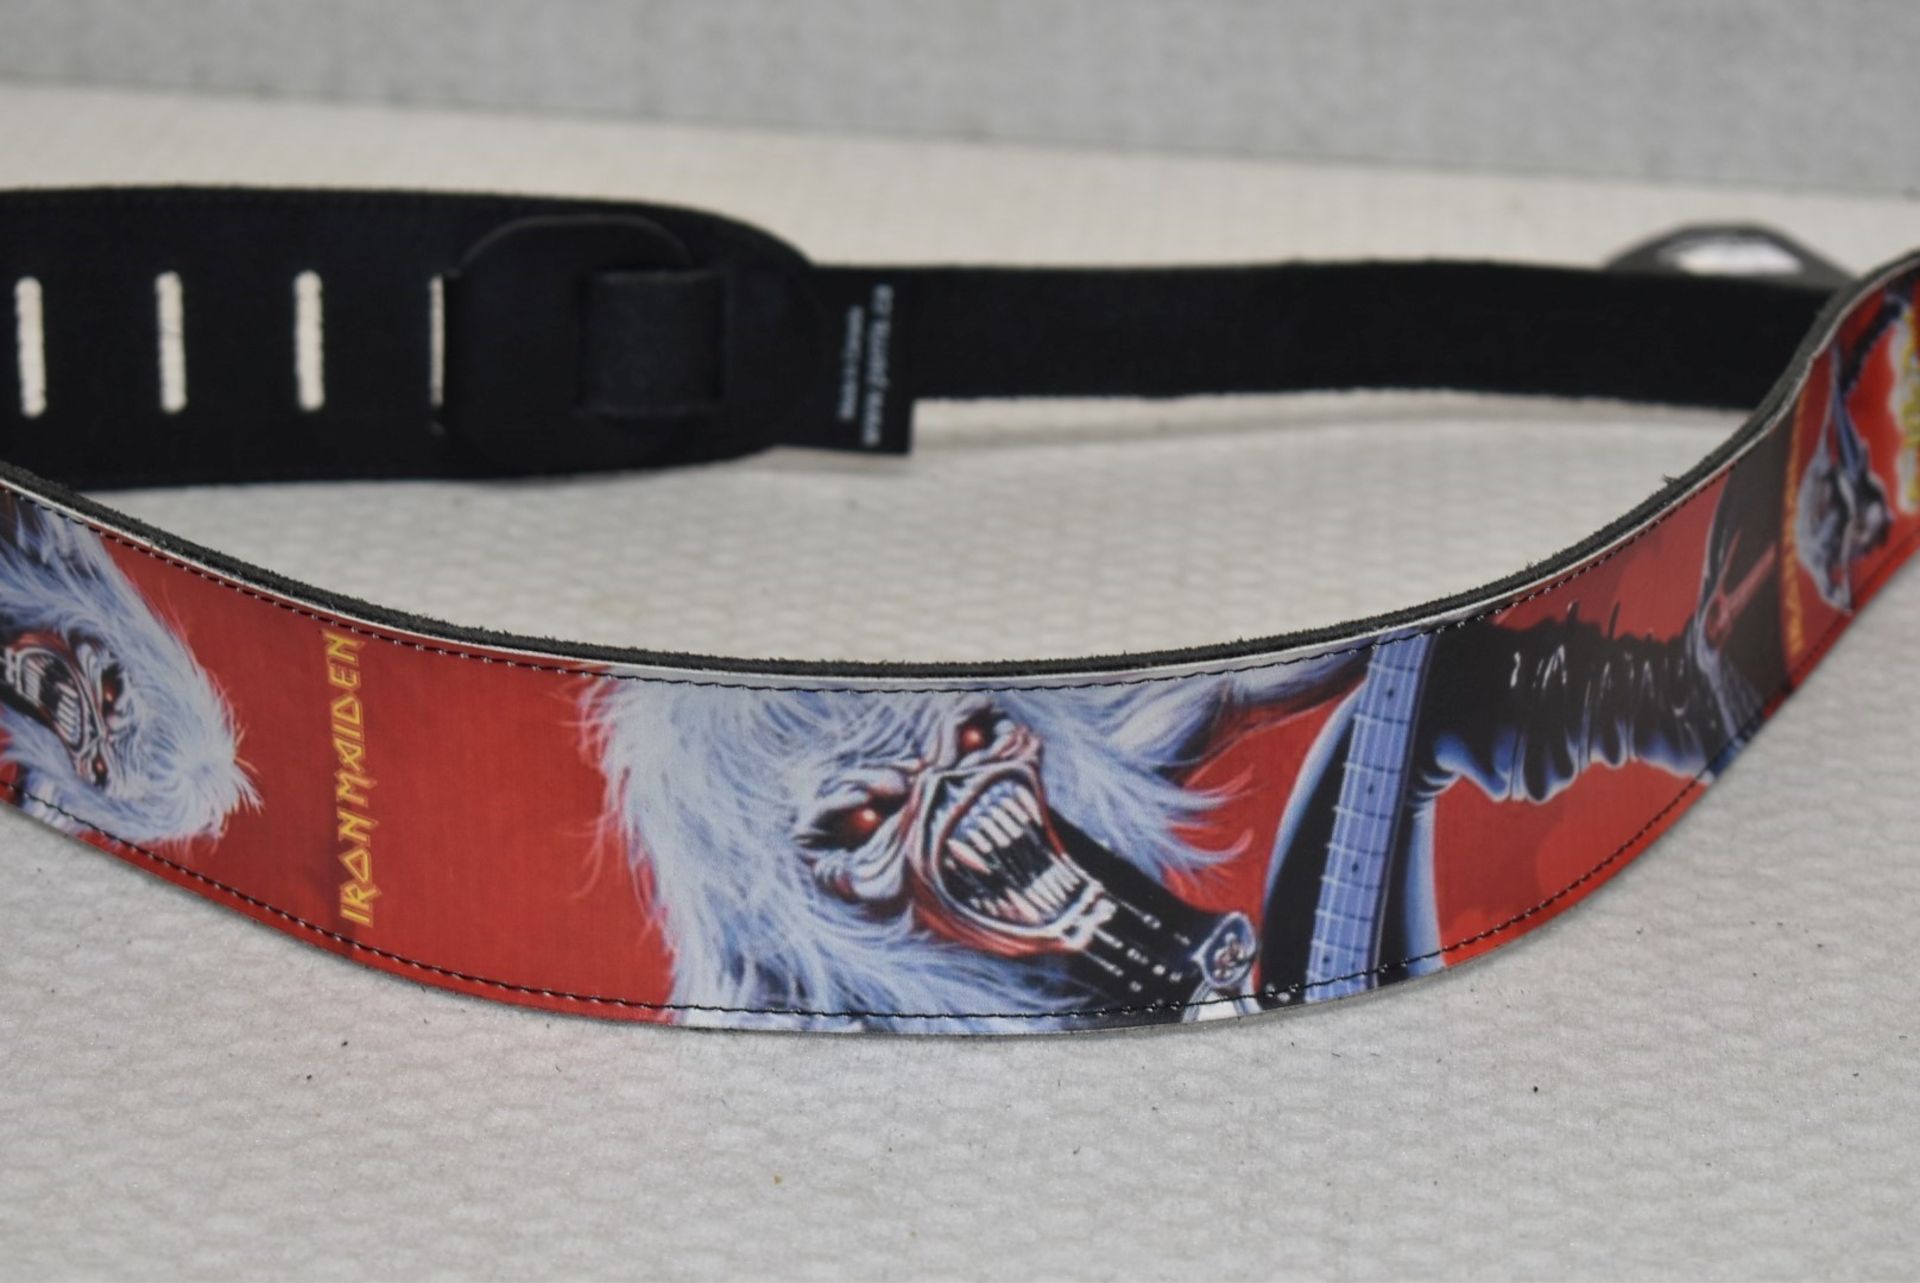 1 x Iron Maiden Leather Guitar Strap by Perri's - Officially Licensed Merchandise - RRP £40 - New & - Image 3 of 9